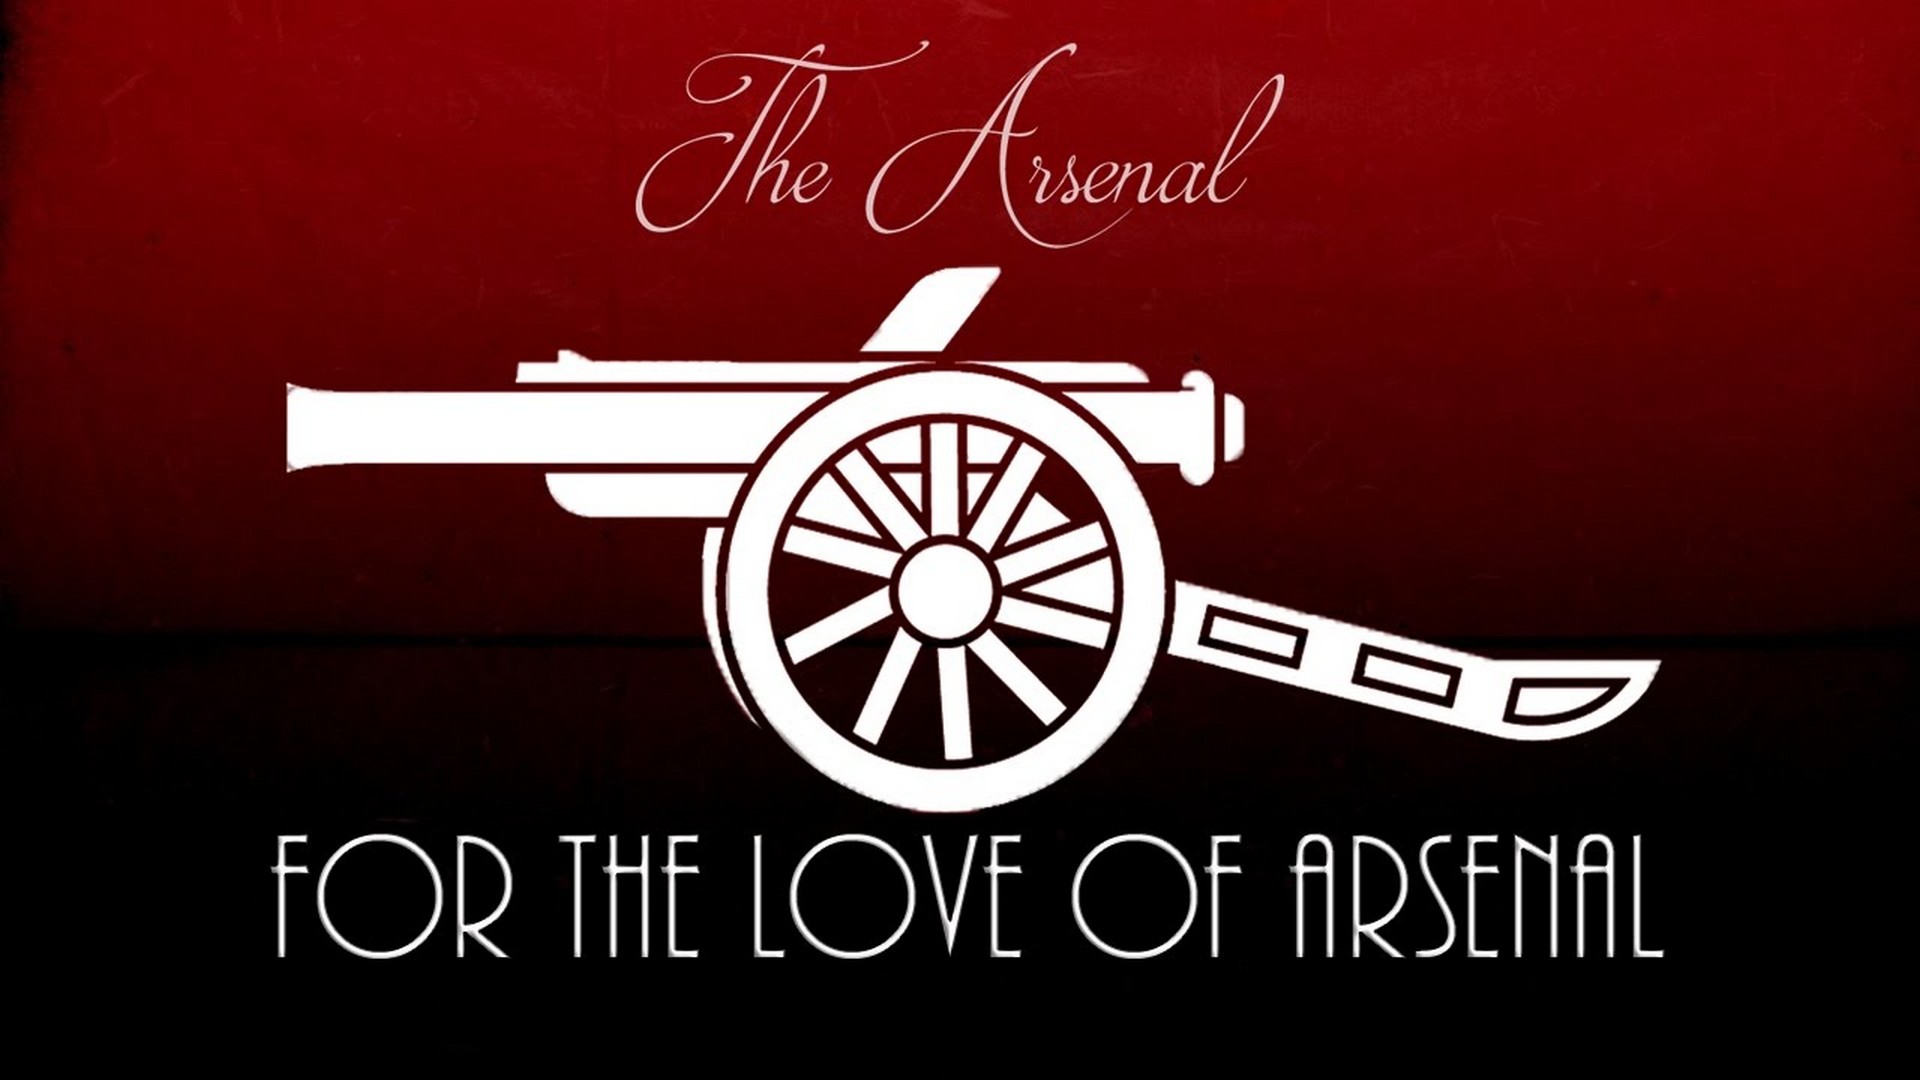 Wallpaper Desktop Arsenal Football Club HD With Resolution 1920X1080 pixel. You can make this wallpaper for your Mac or Windows Desktop Background, iPhone, Android or Tablet and another Smartphone device for free